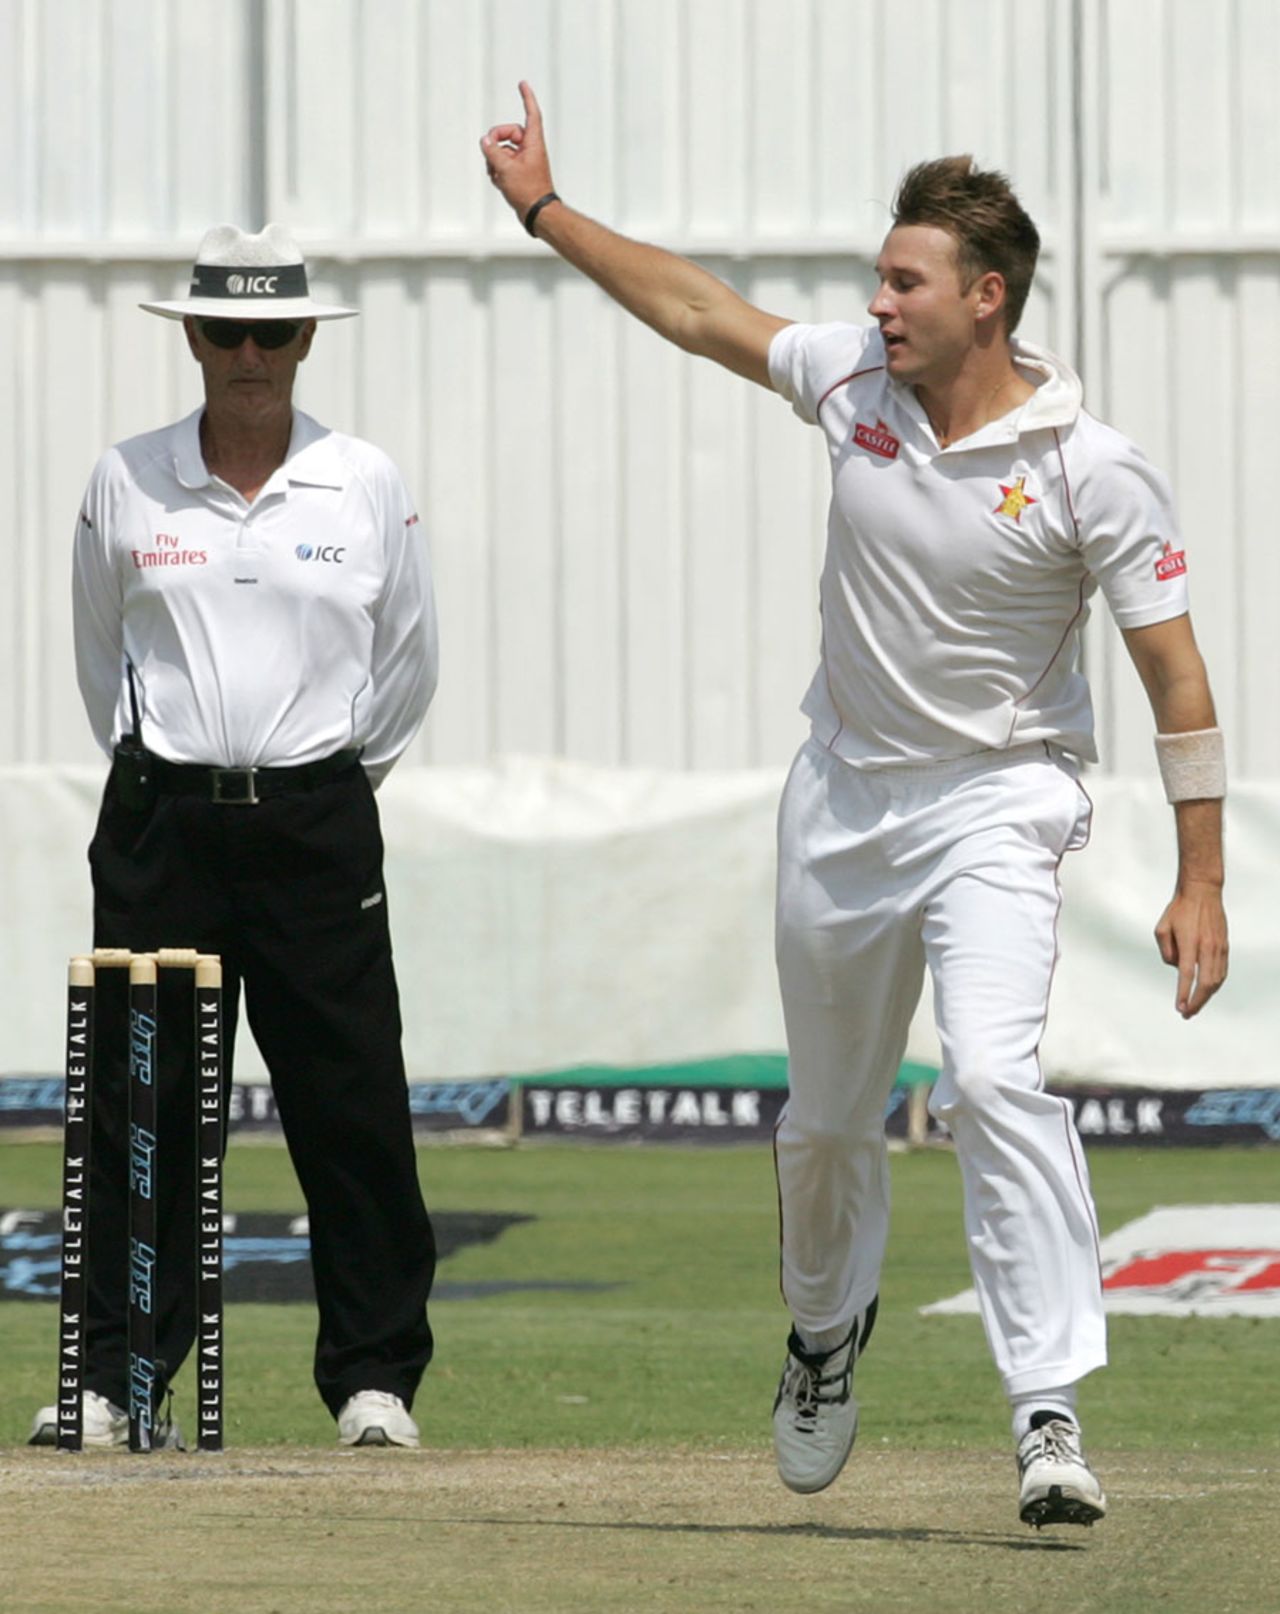 Kyle Jarvis picked up three wickets in the second innings, Zimbabwe v Bangladesh, 1st Test, 4th day, Harare, April 20, 2013